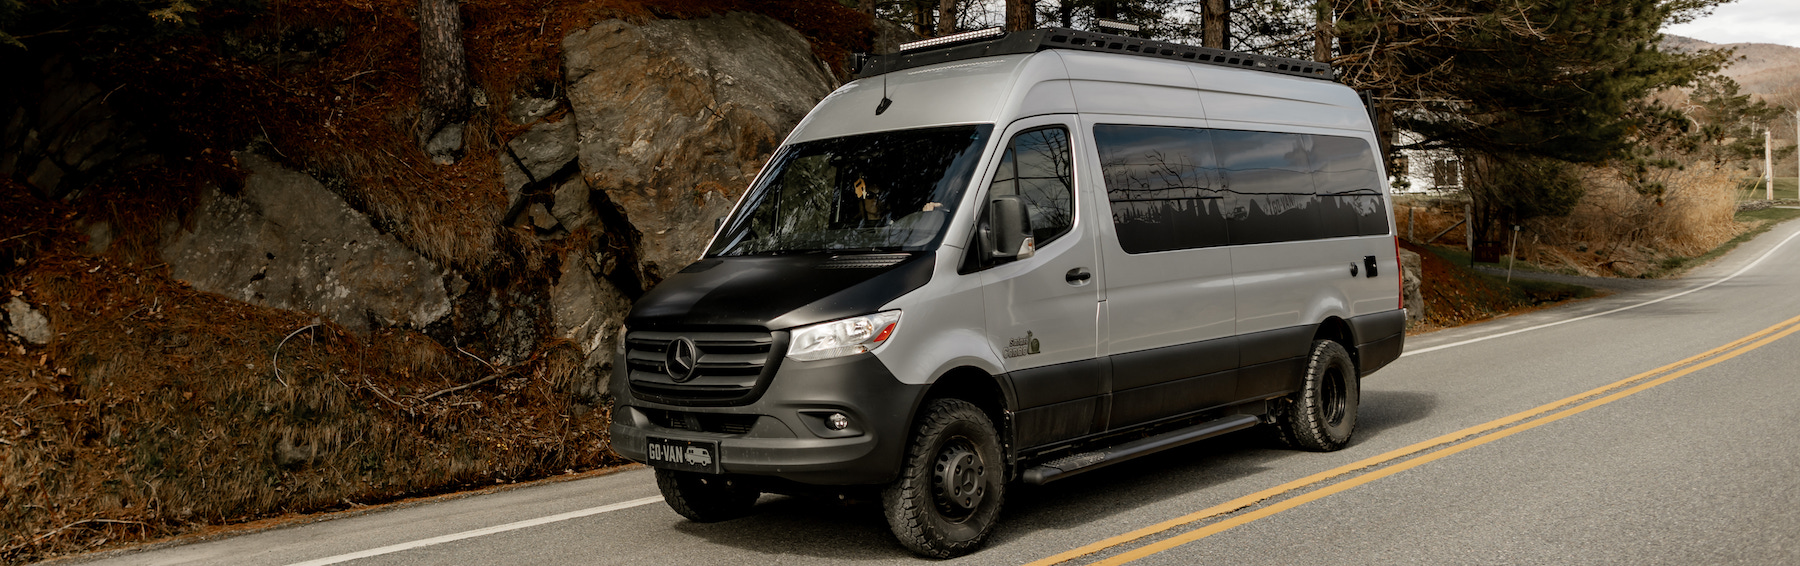 Vanlife Tips: How to Use a Security Camera to Protect your Home While Traveling on the Road